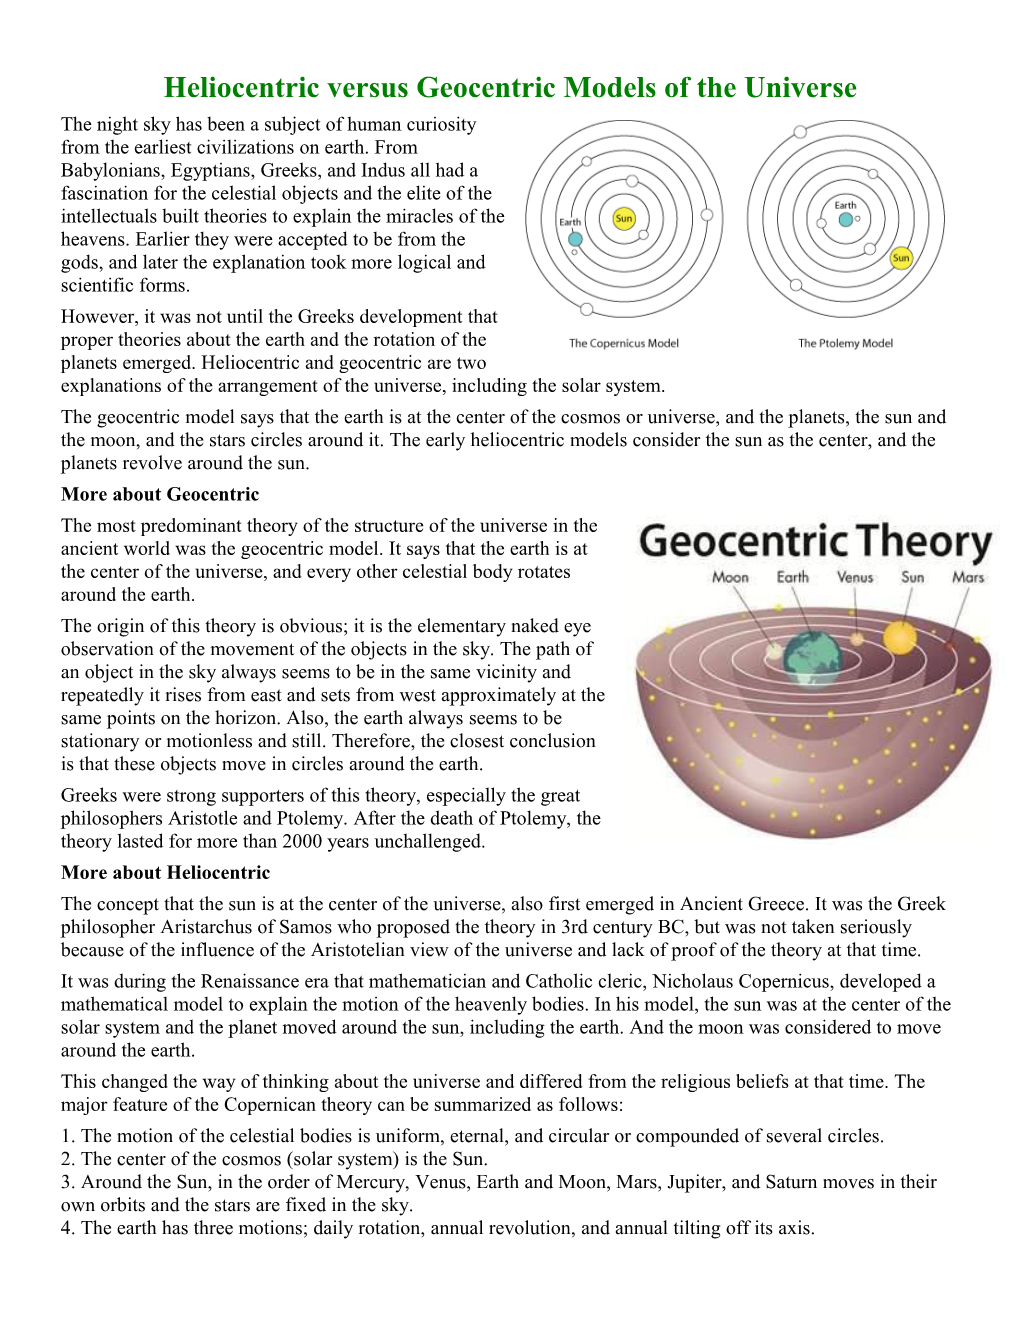 Heliocentric Versus Geocentric Models of the Universe